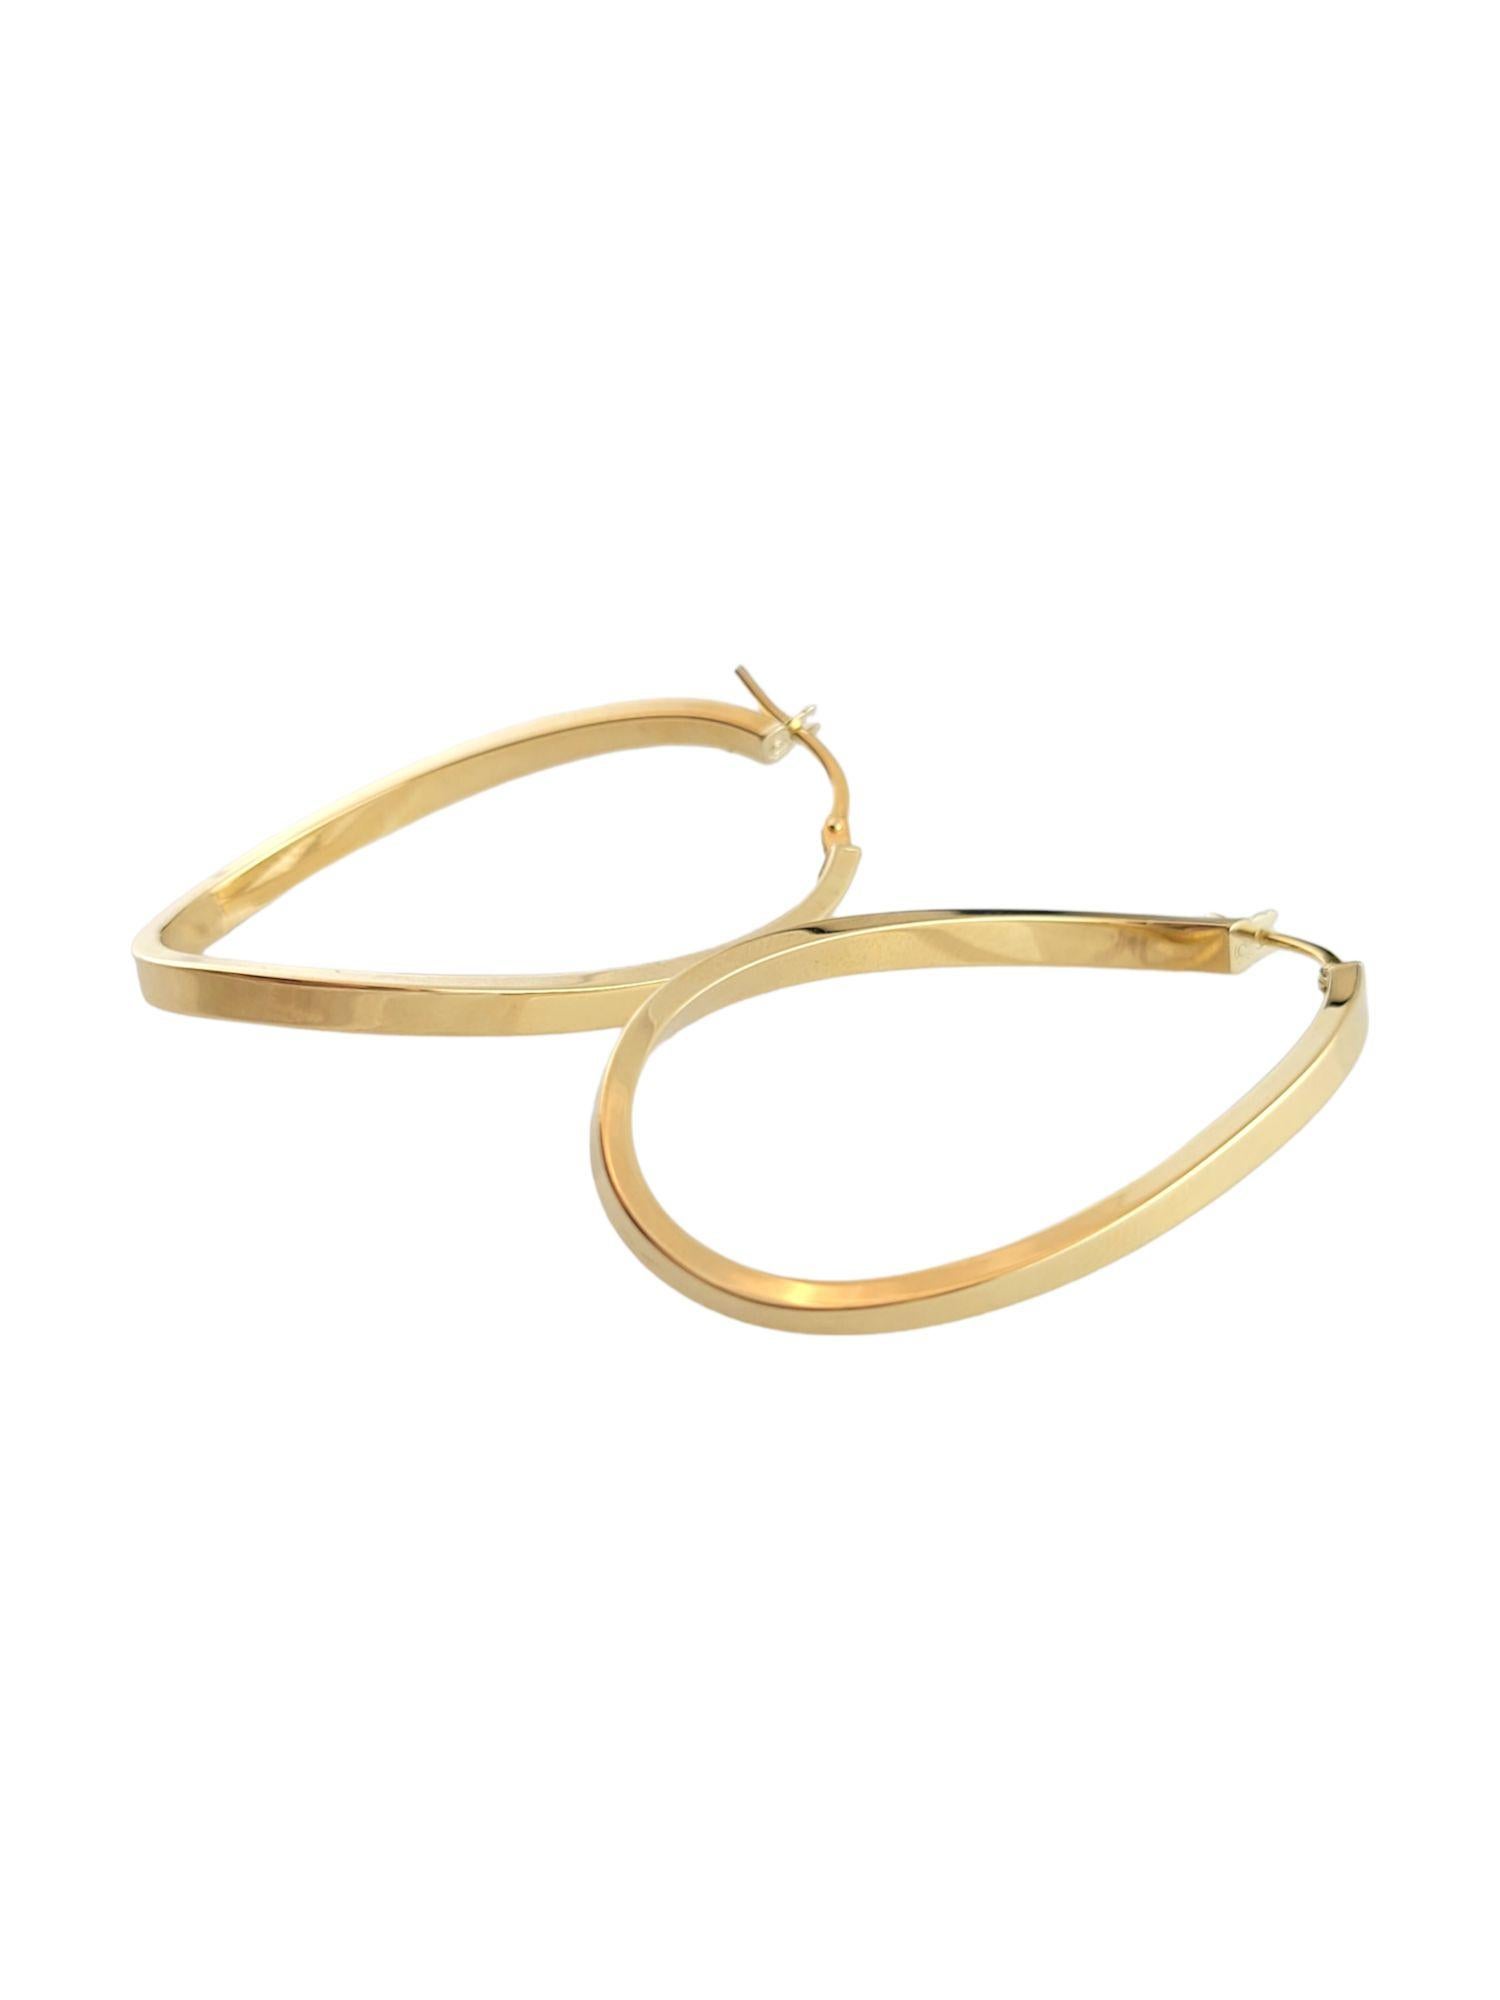 Gorgeous set of 18K gold curved oval hoops!

Size: 14.2mm X 24.4mm X 2.9mm

Weight: 3.21 g/ 2.0 dwt

Hallmark: 750 ITALY

Very good condition, professionally polished.

Will come packaged in a gift box or pouch (when possible) and will be shipped